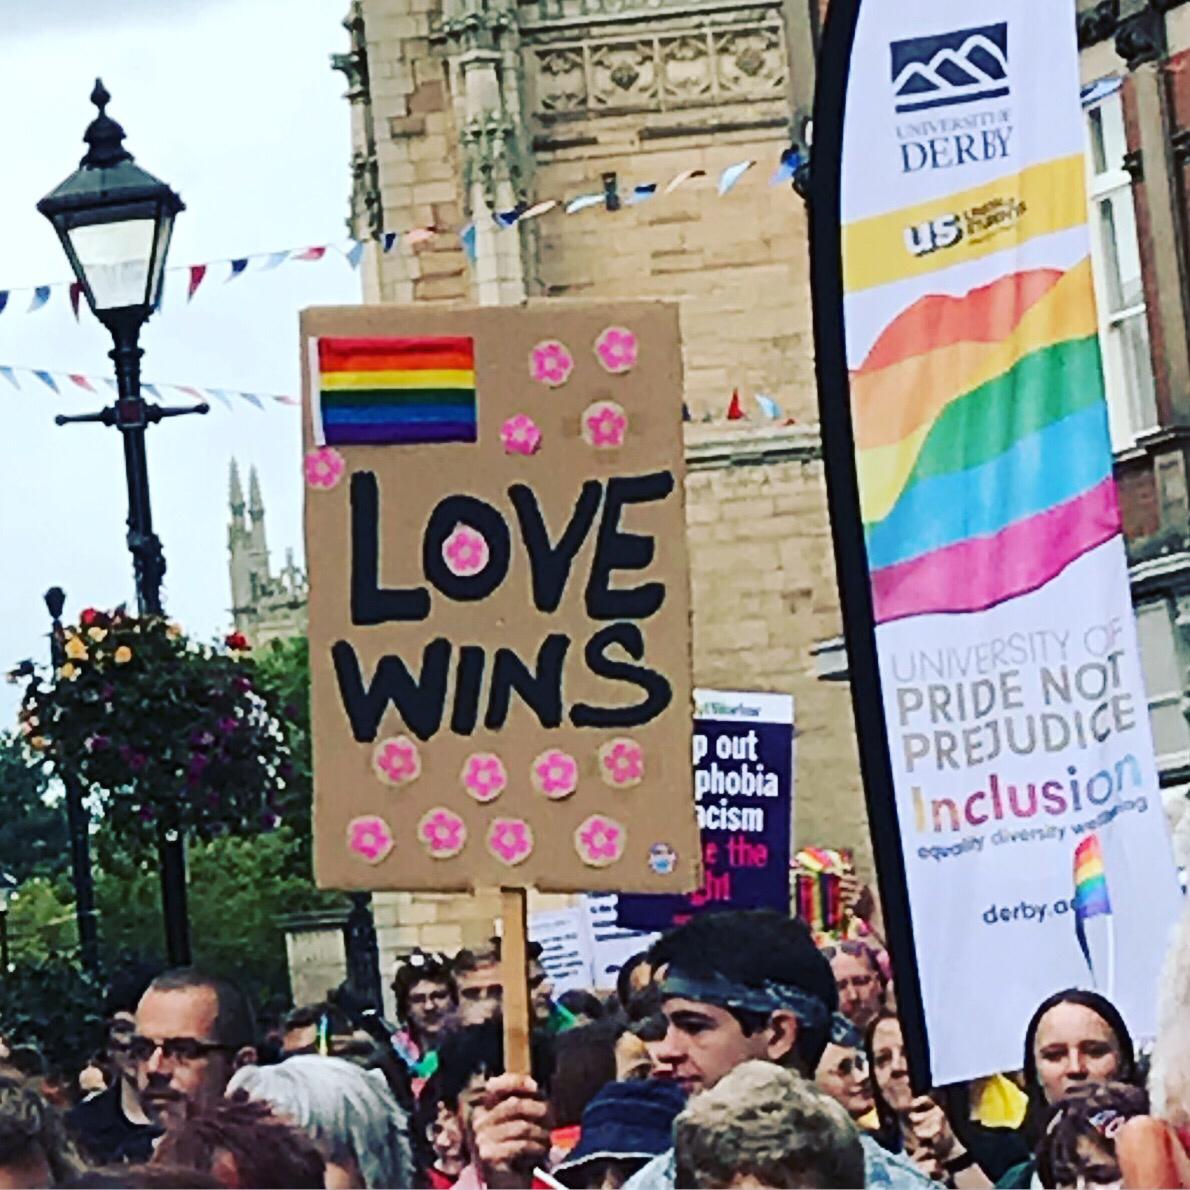 Derby Pride – what a ride! The day the superheroes came to town